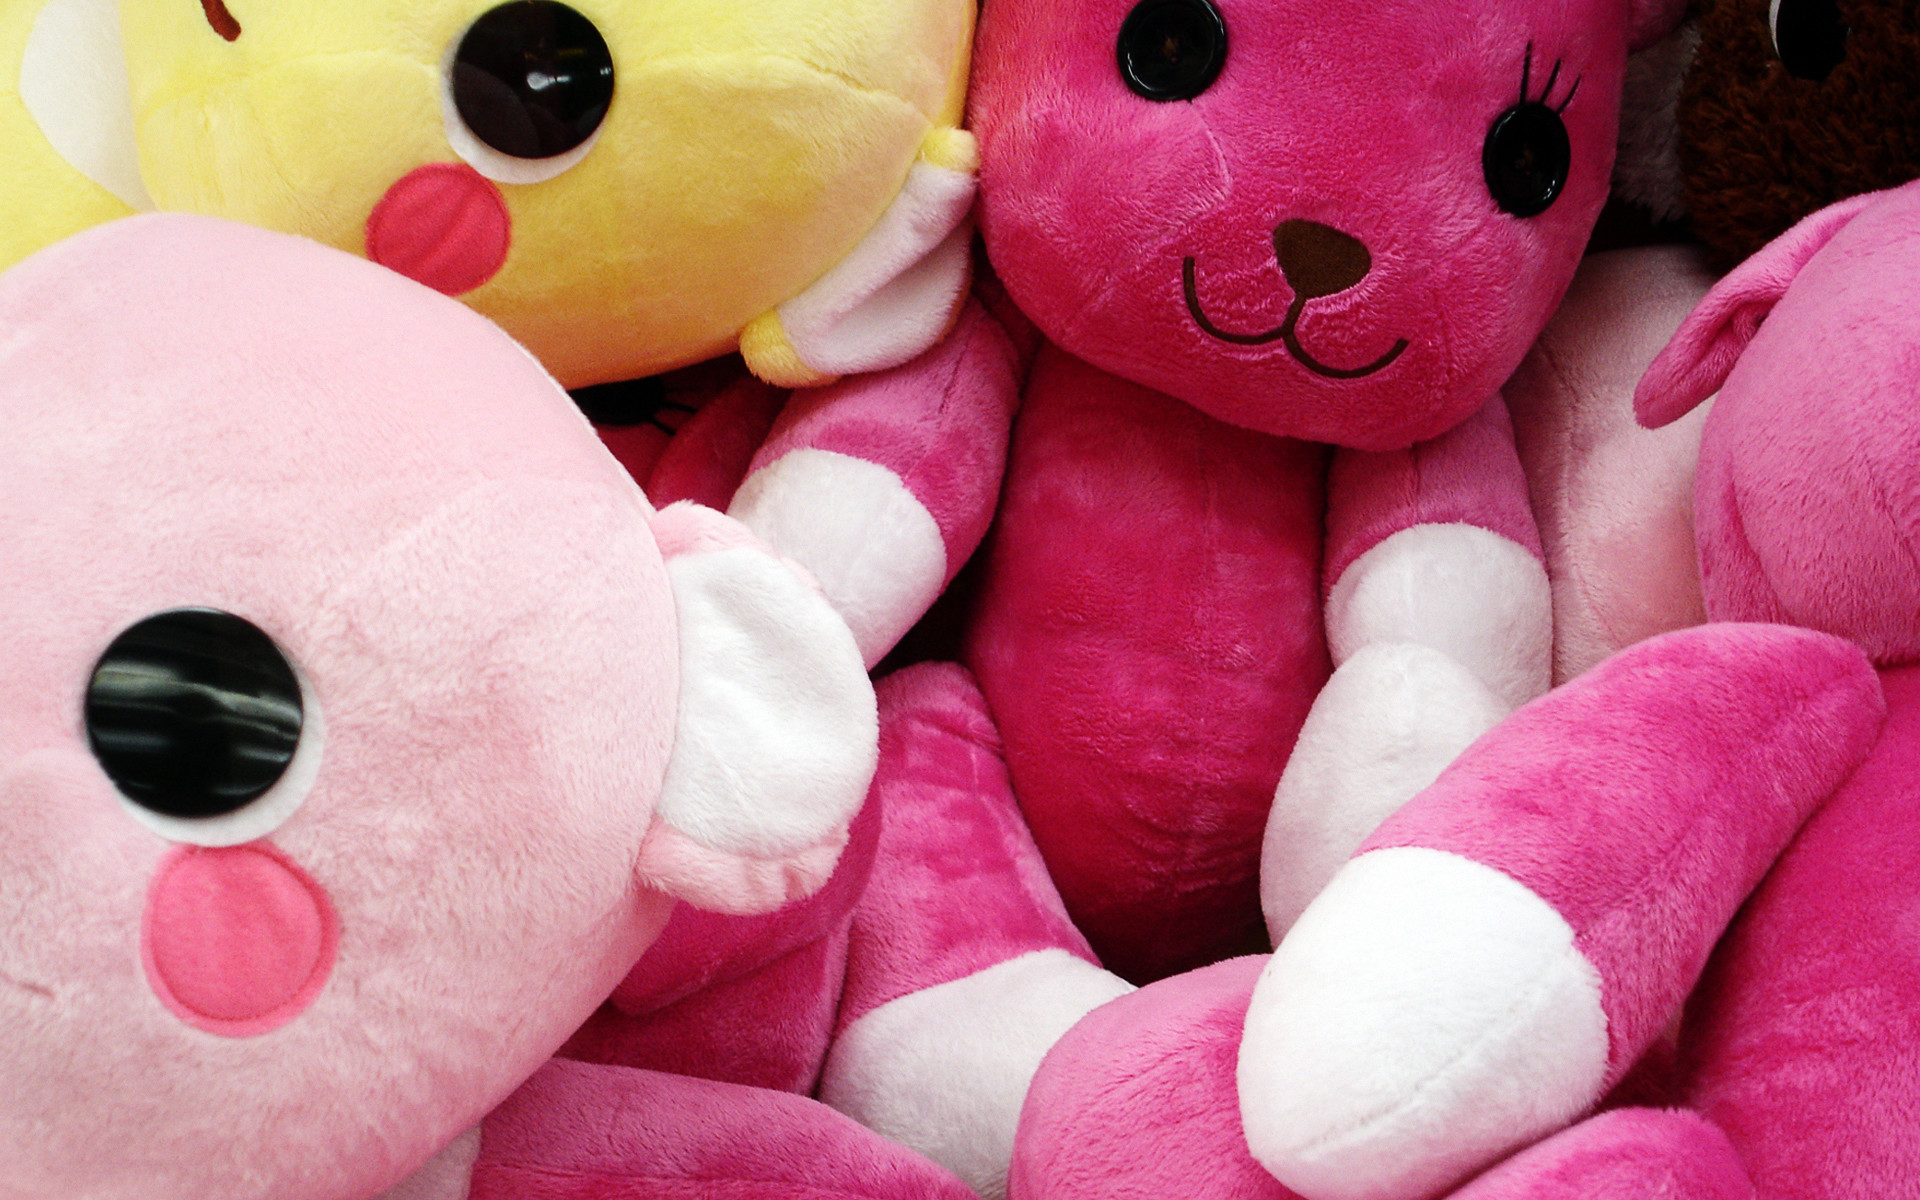 1920x1200 Cute pink teddy bear wallpapers for mobile - photo#19